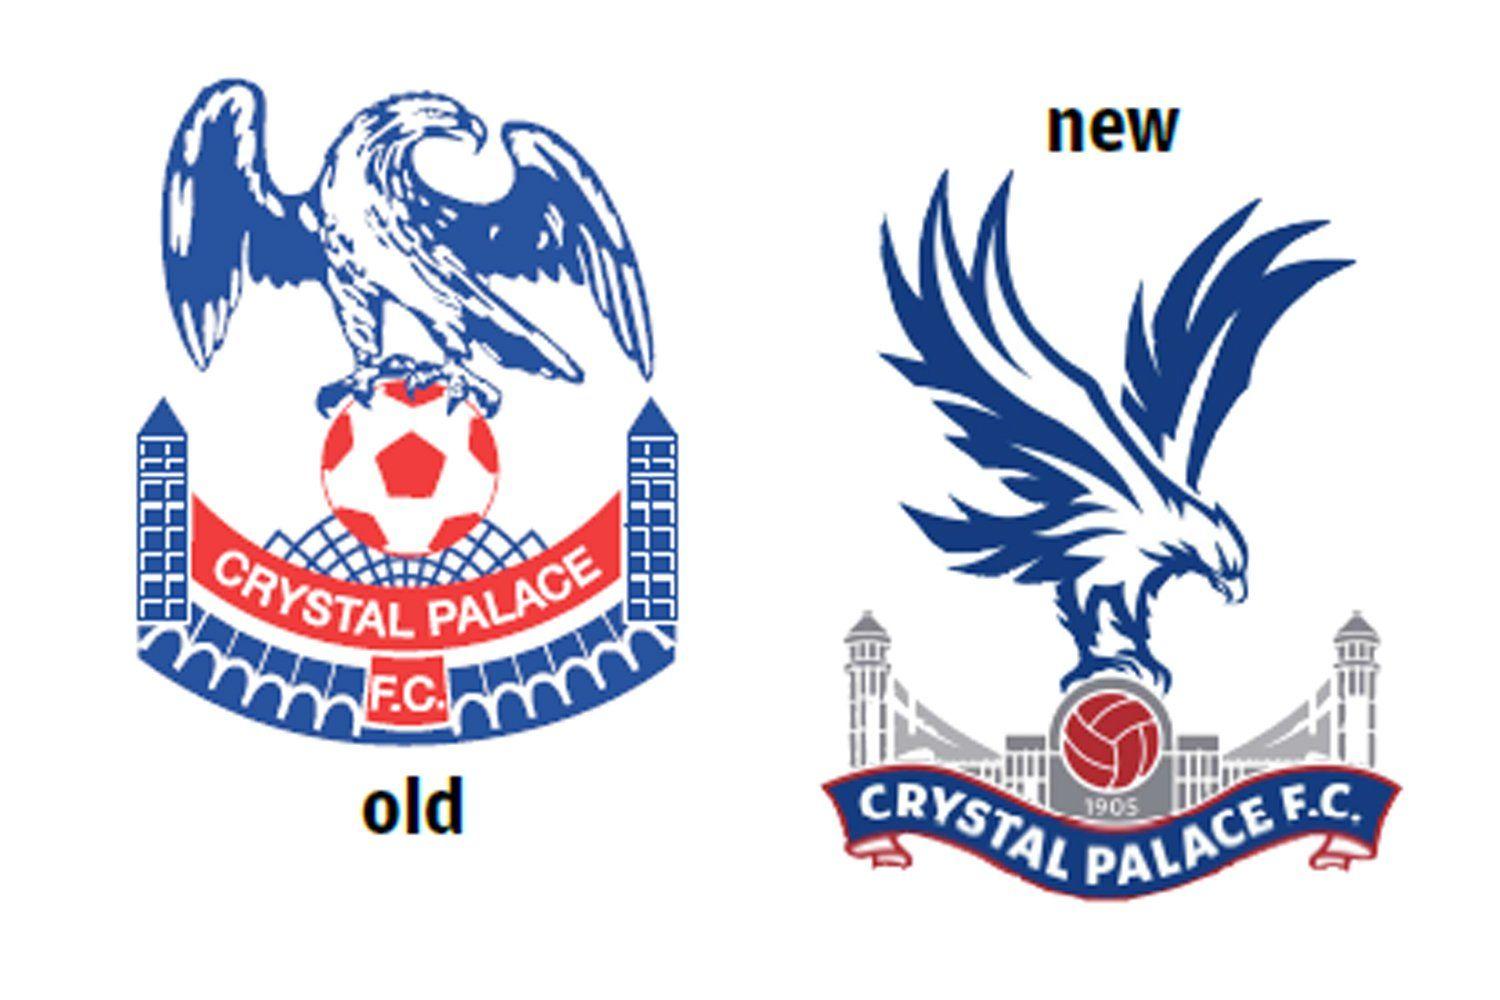 New Crystal Palace Logo - Crest fallen? The changing faces of London's Premier League clubs